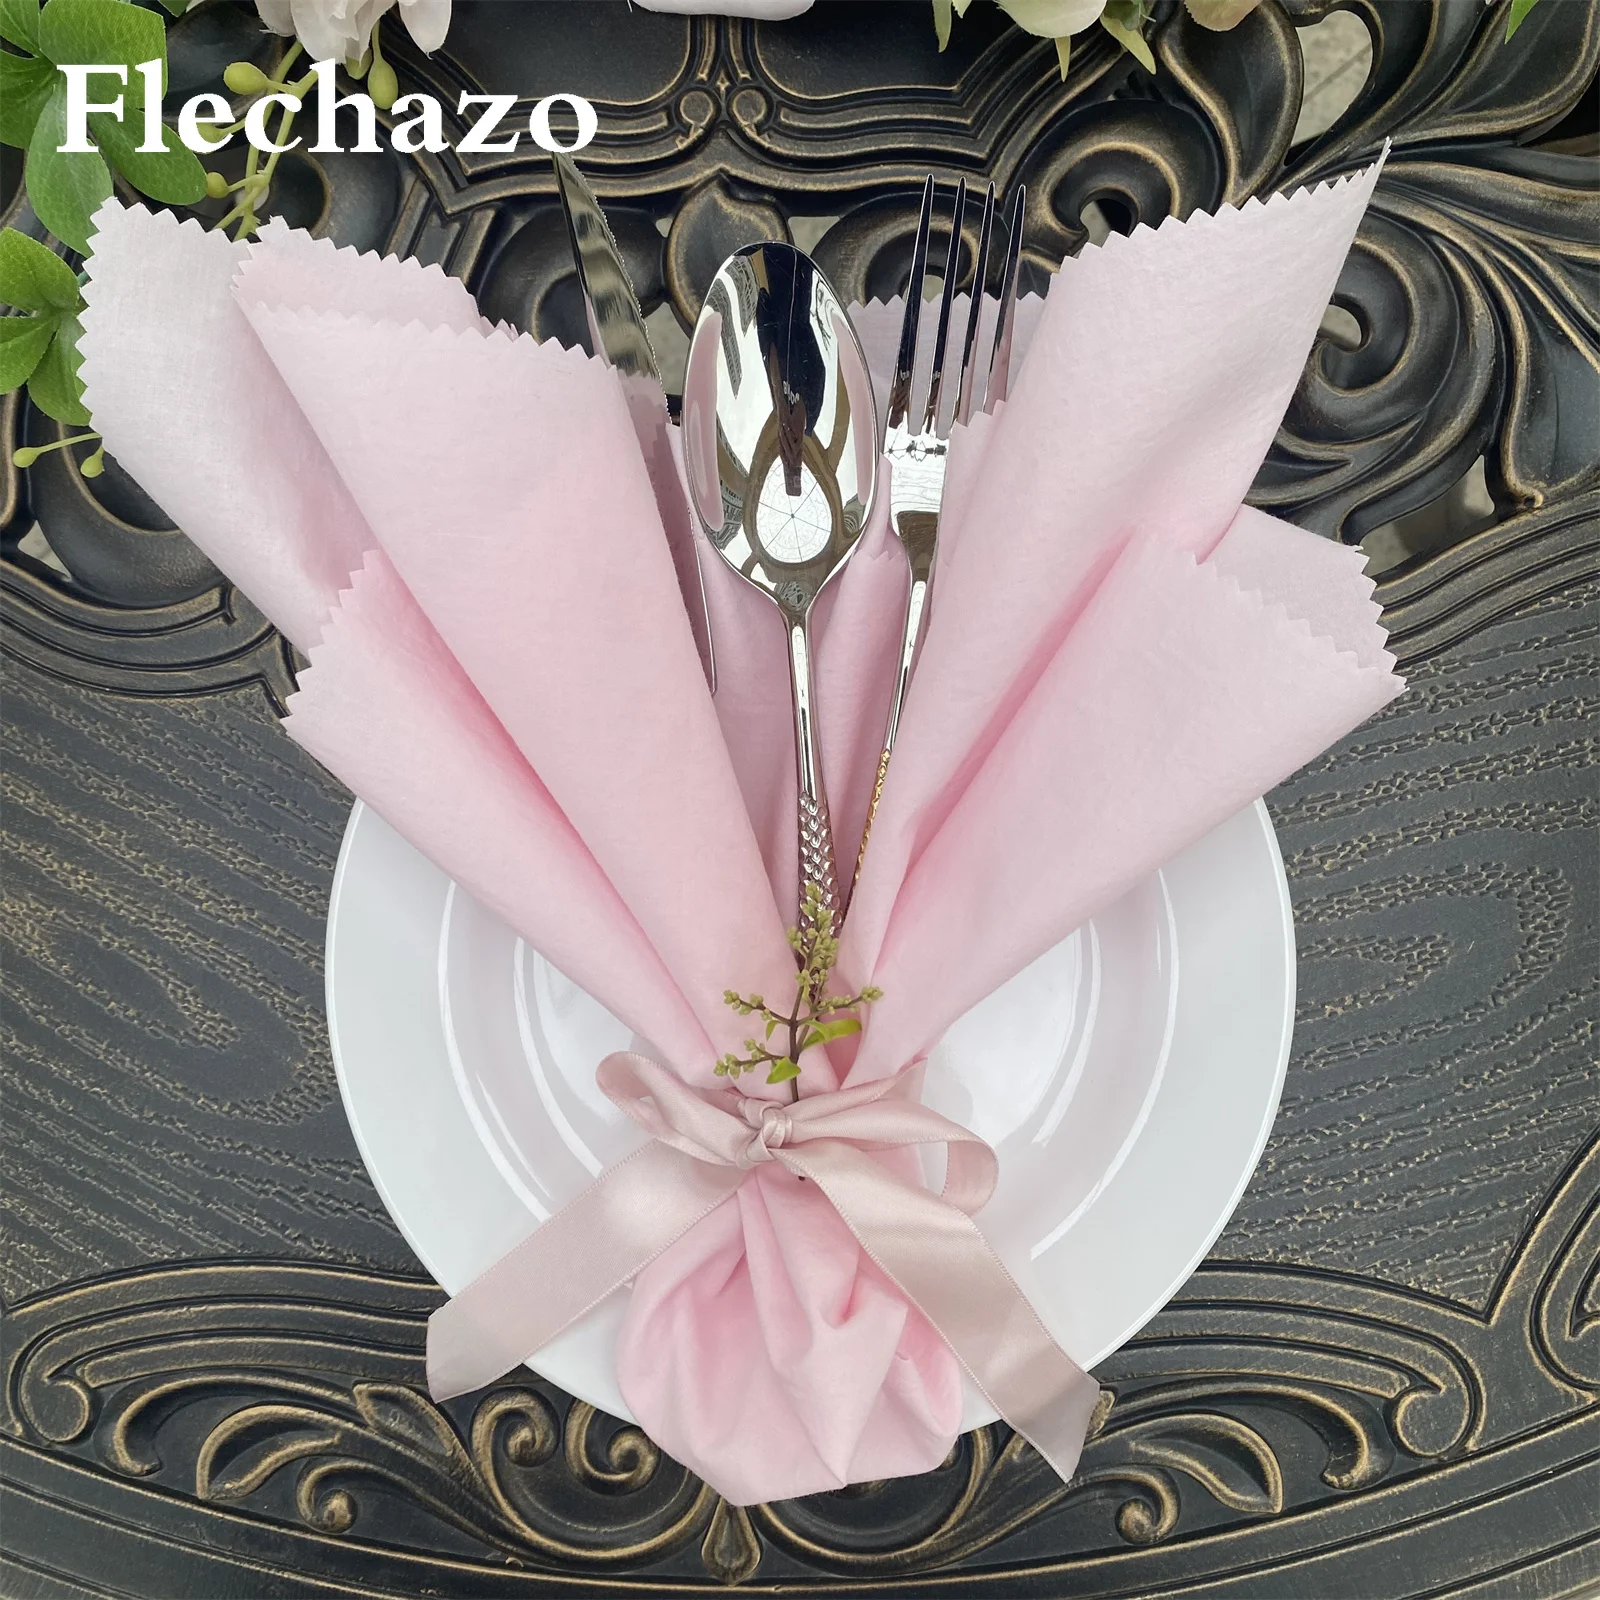 12pcs Wedding Napkins 46*46cm Cotton for Party Table Dinner Decor Cloth Linen Country Birthday Serving Fabric Soft Handkerchief